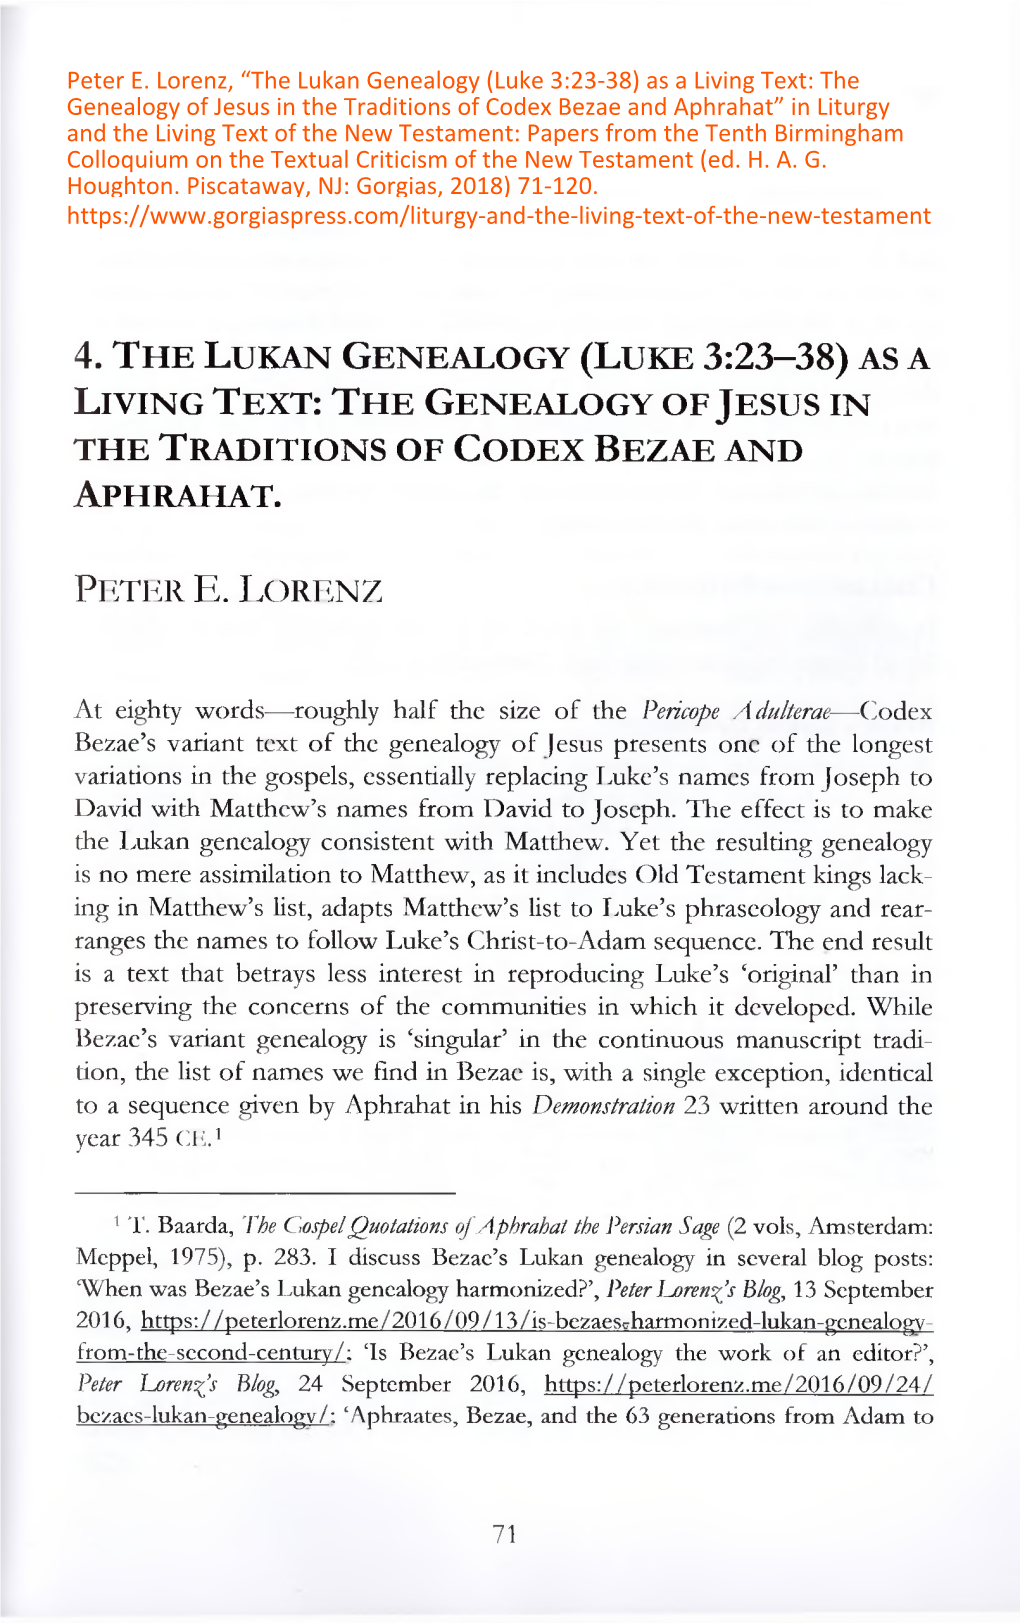 The G Enealogy of Jesus in Th E Traditions of Codex Bezae and a P H R a H a T